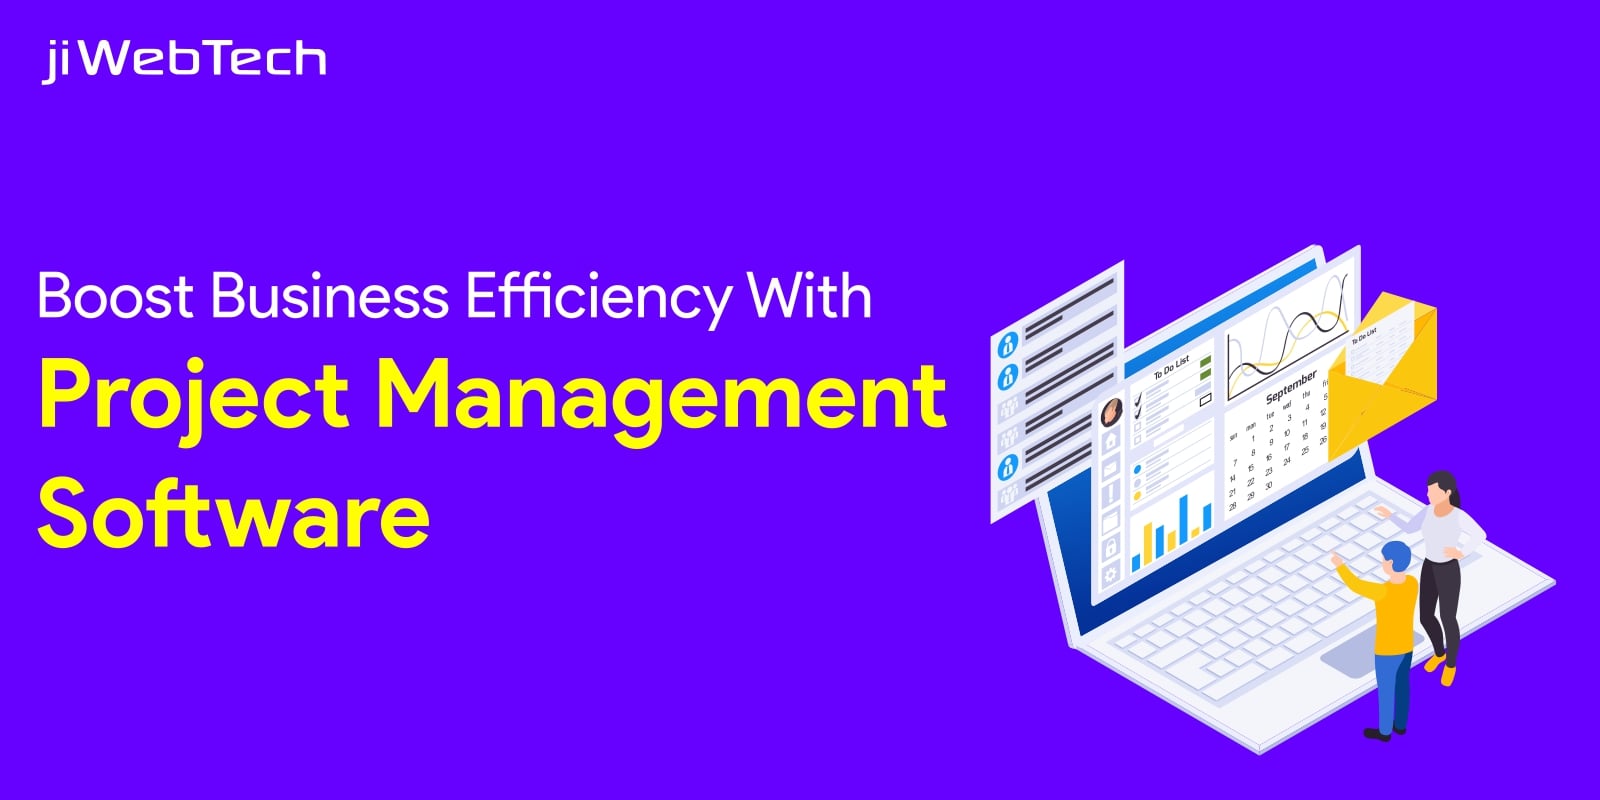 How does Project Management Software boost your Business Efficiency?